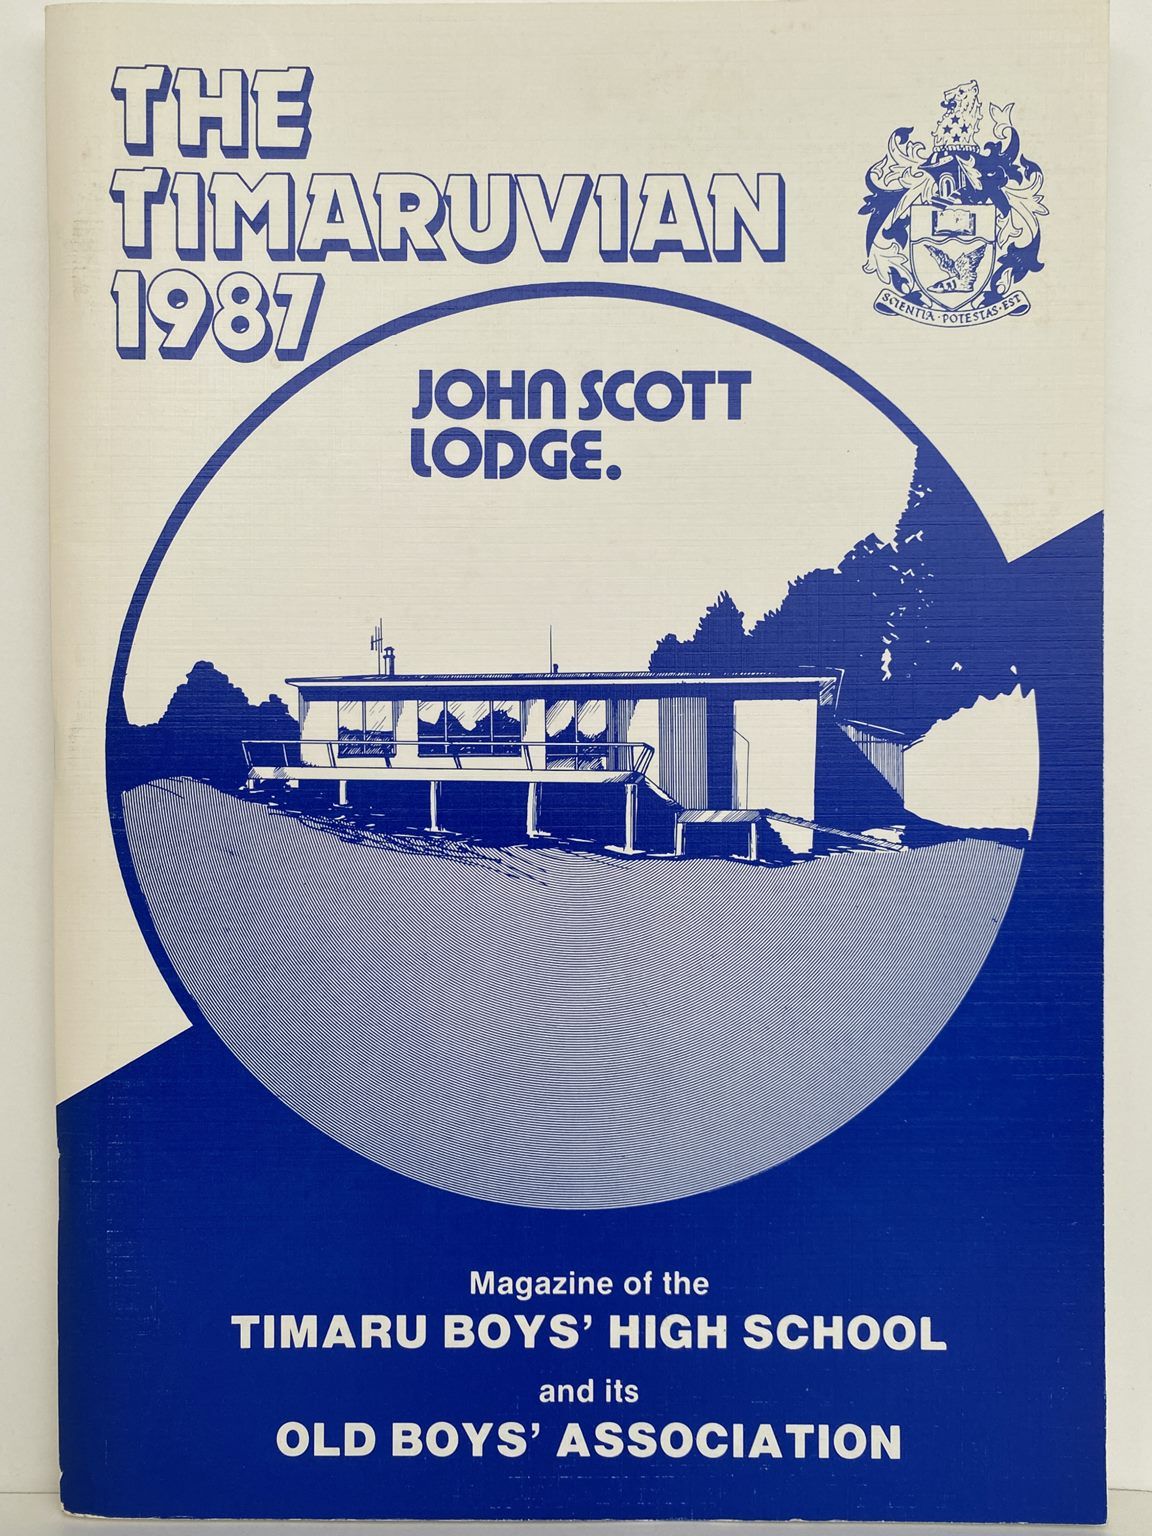 THE TIMARUVIAN: Magazine of the Timaru Boys' High School and its Old Boys' Association 1987